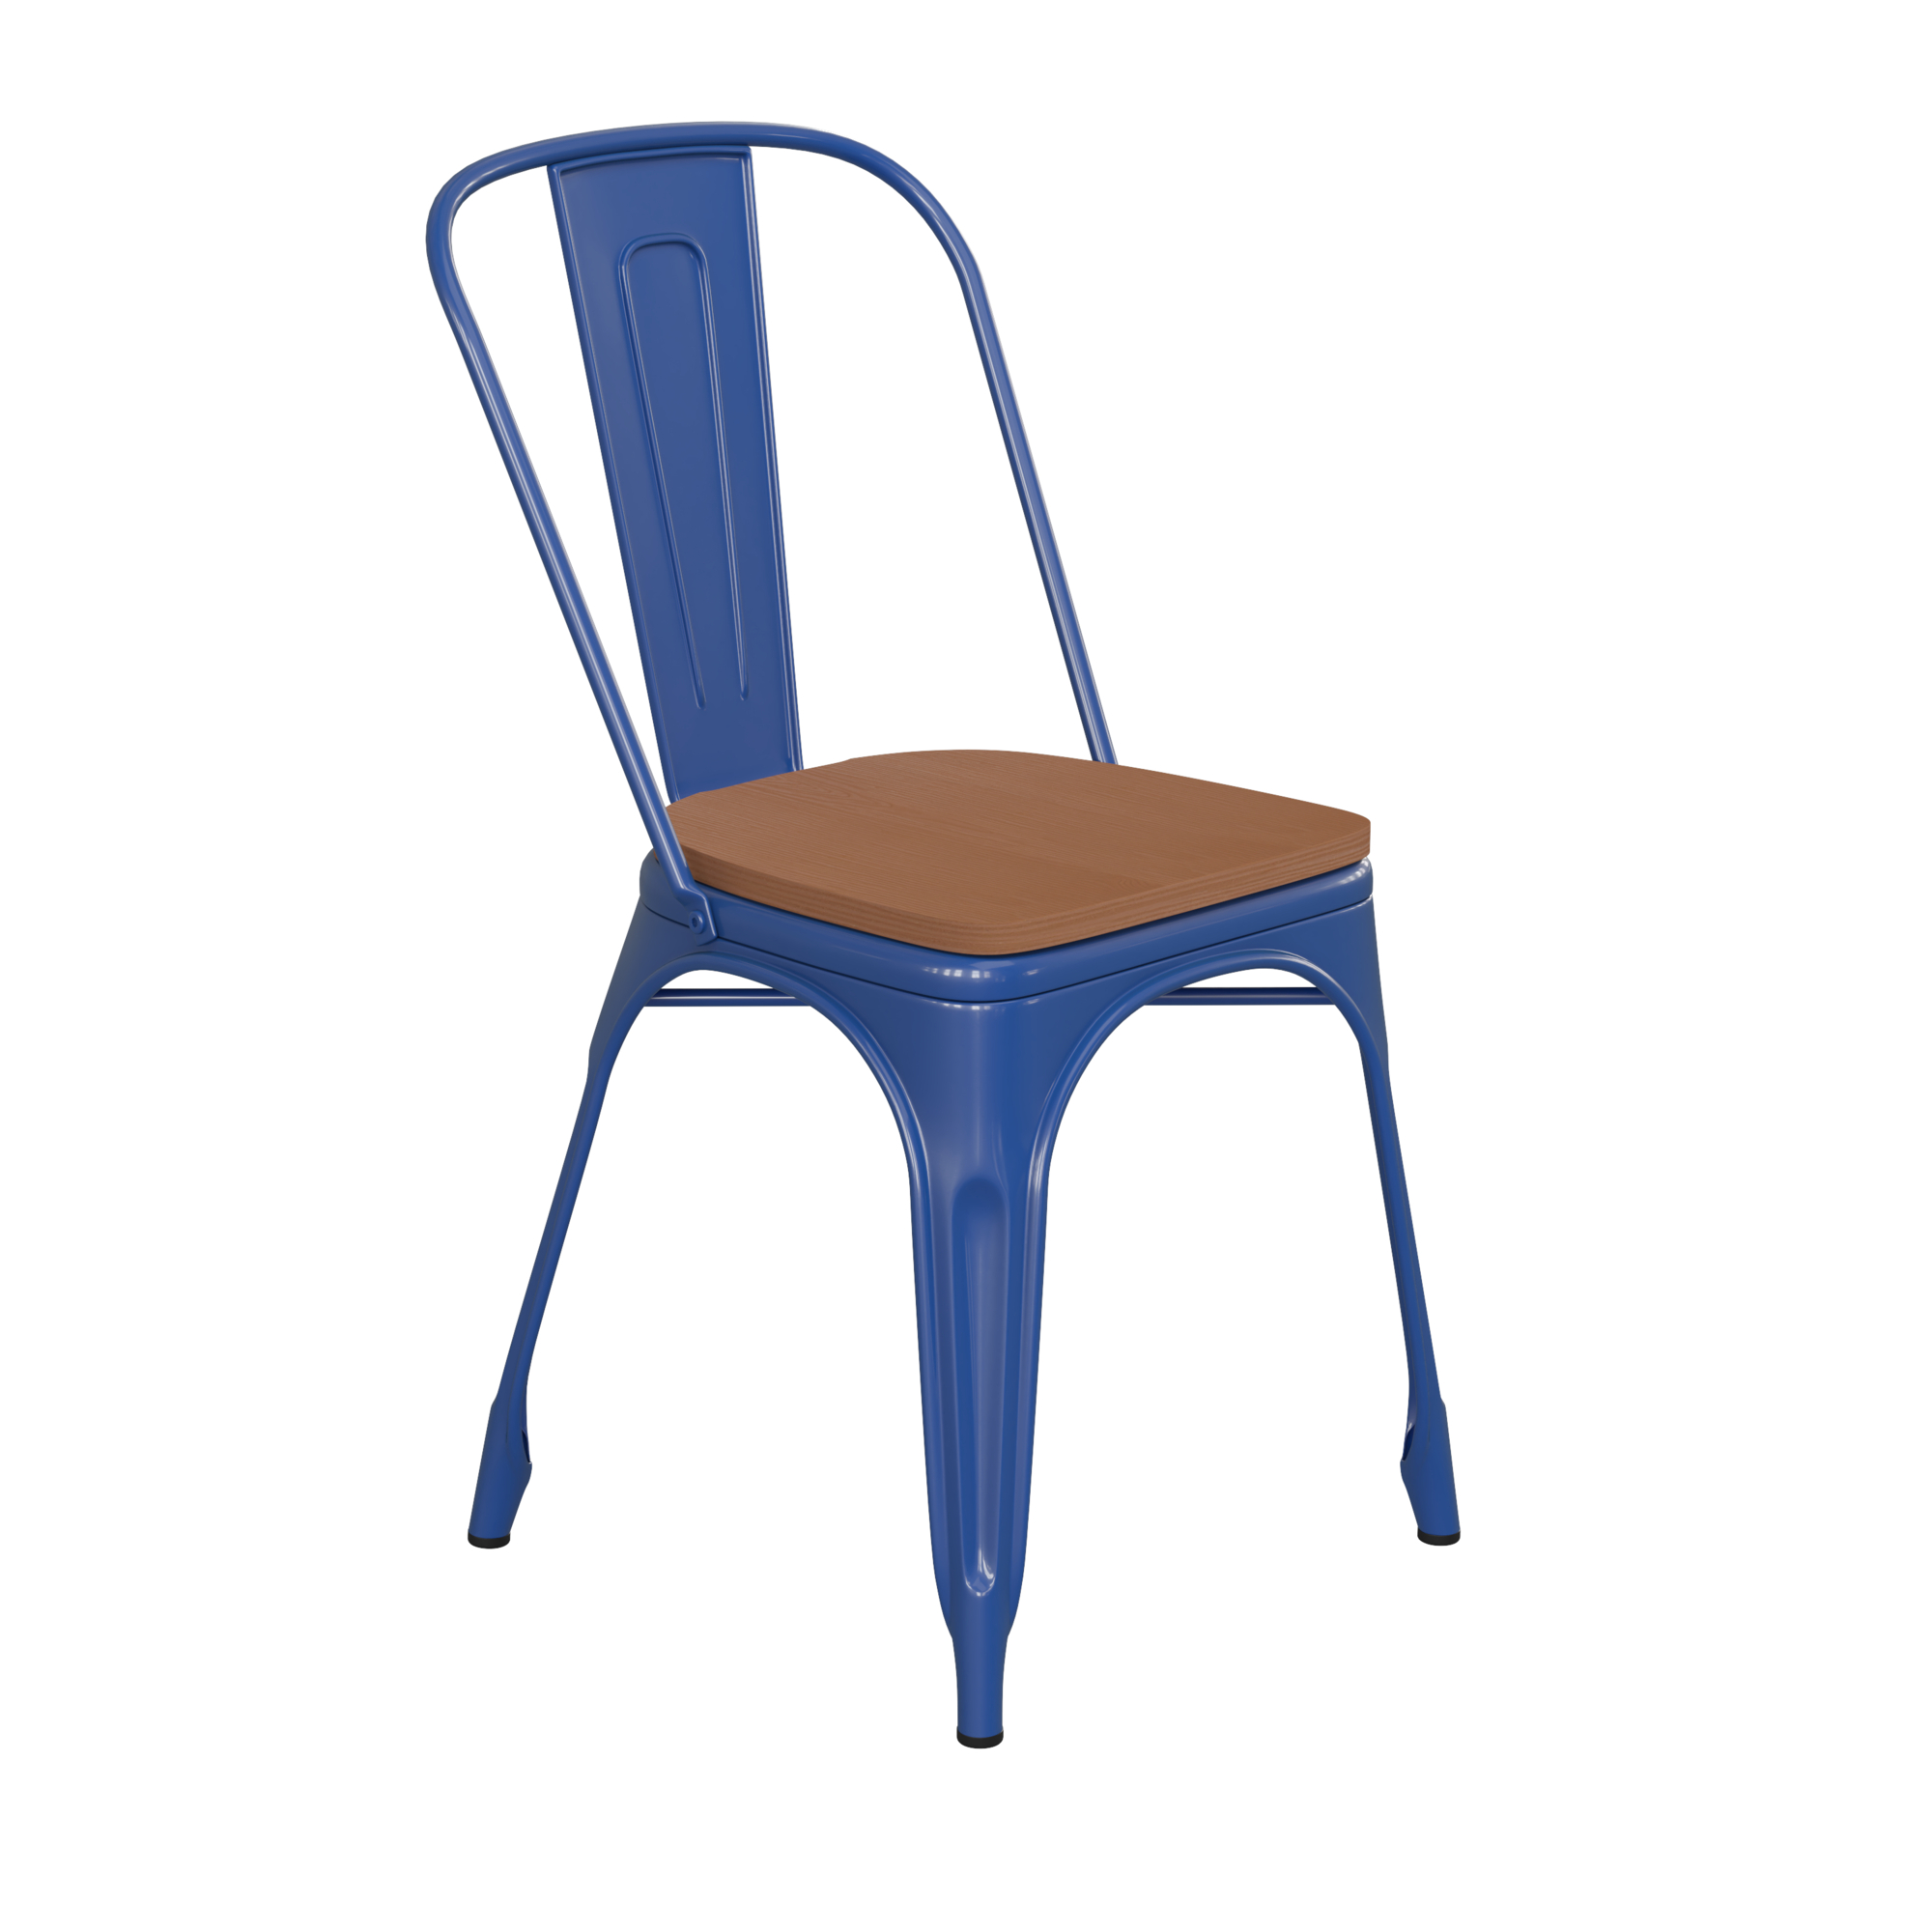 Flash Furniture, Blue Metal Stack Chair with Teak Poly Resin Seat, Primary Color Blue, Included (qty.) 1, Model CH31230BLPL1T